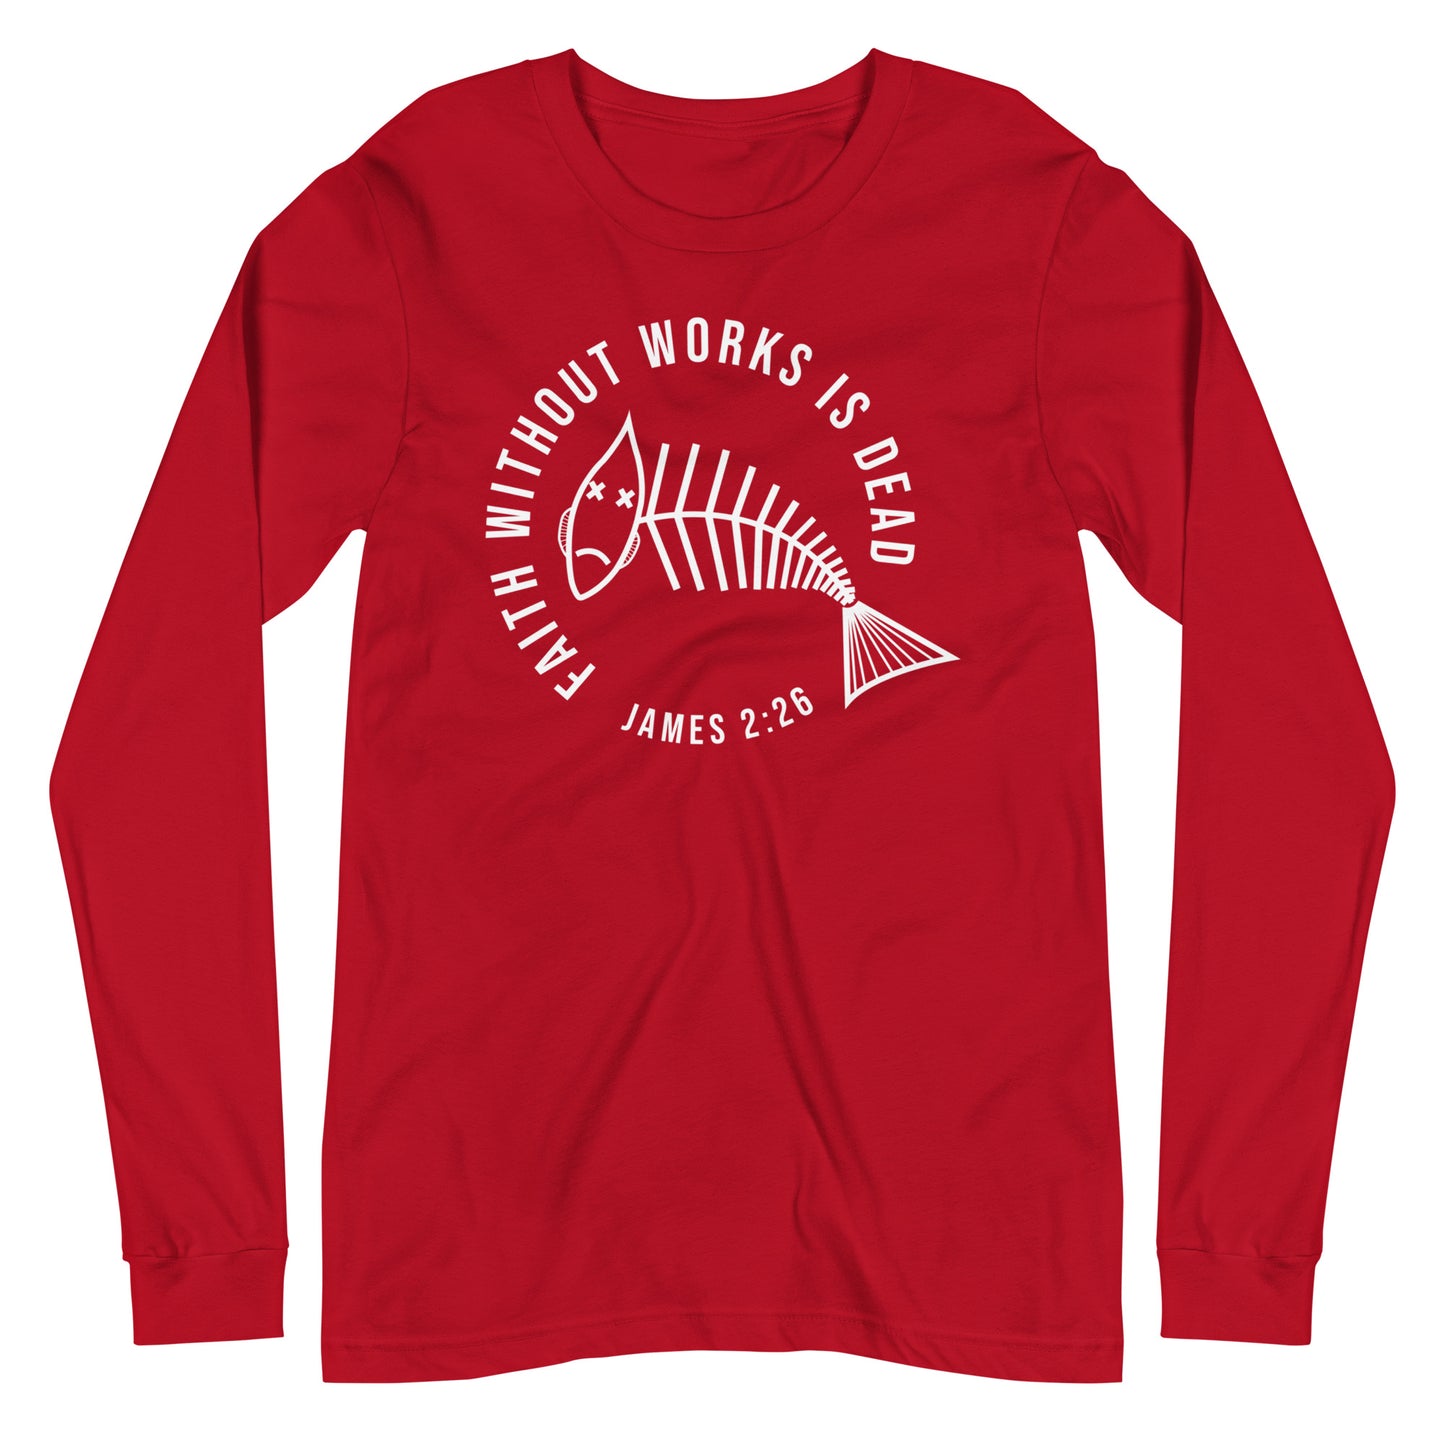 Faith Without Works (Colored) Unisex Long Sleeve Tee